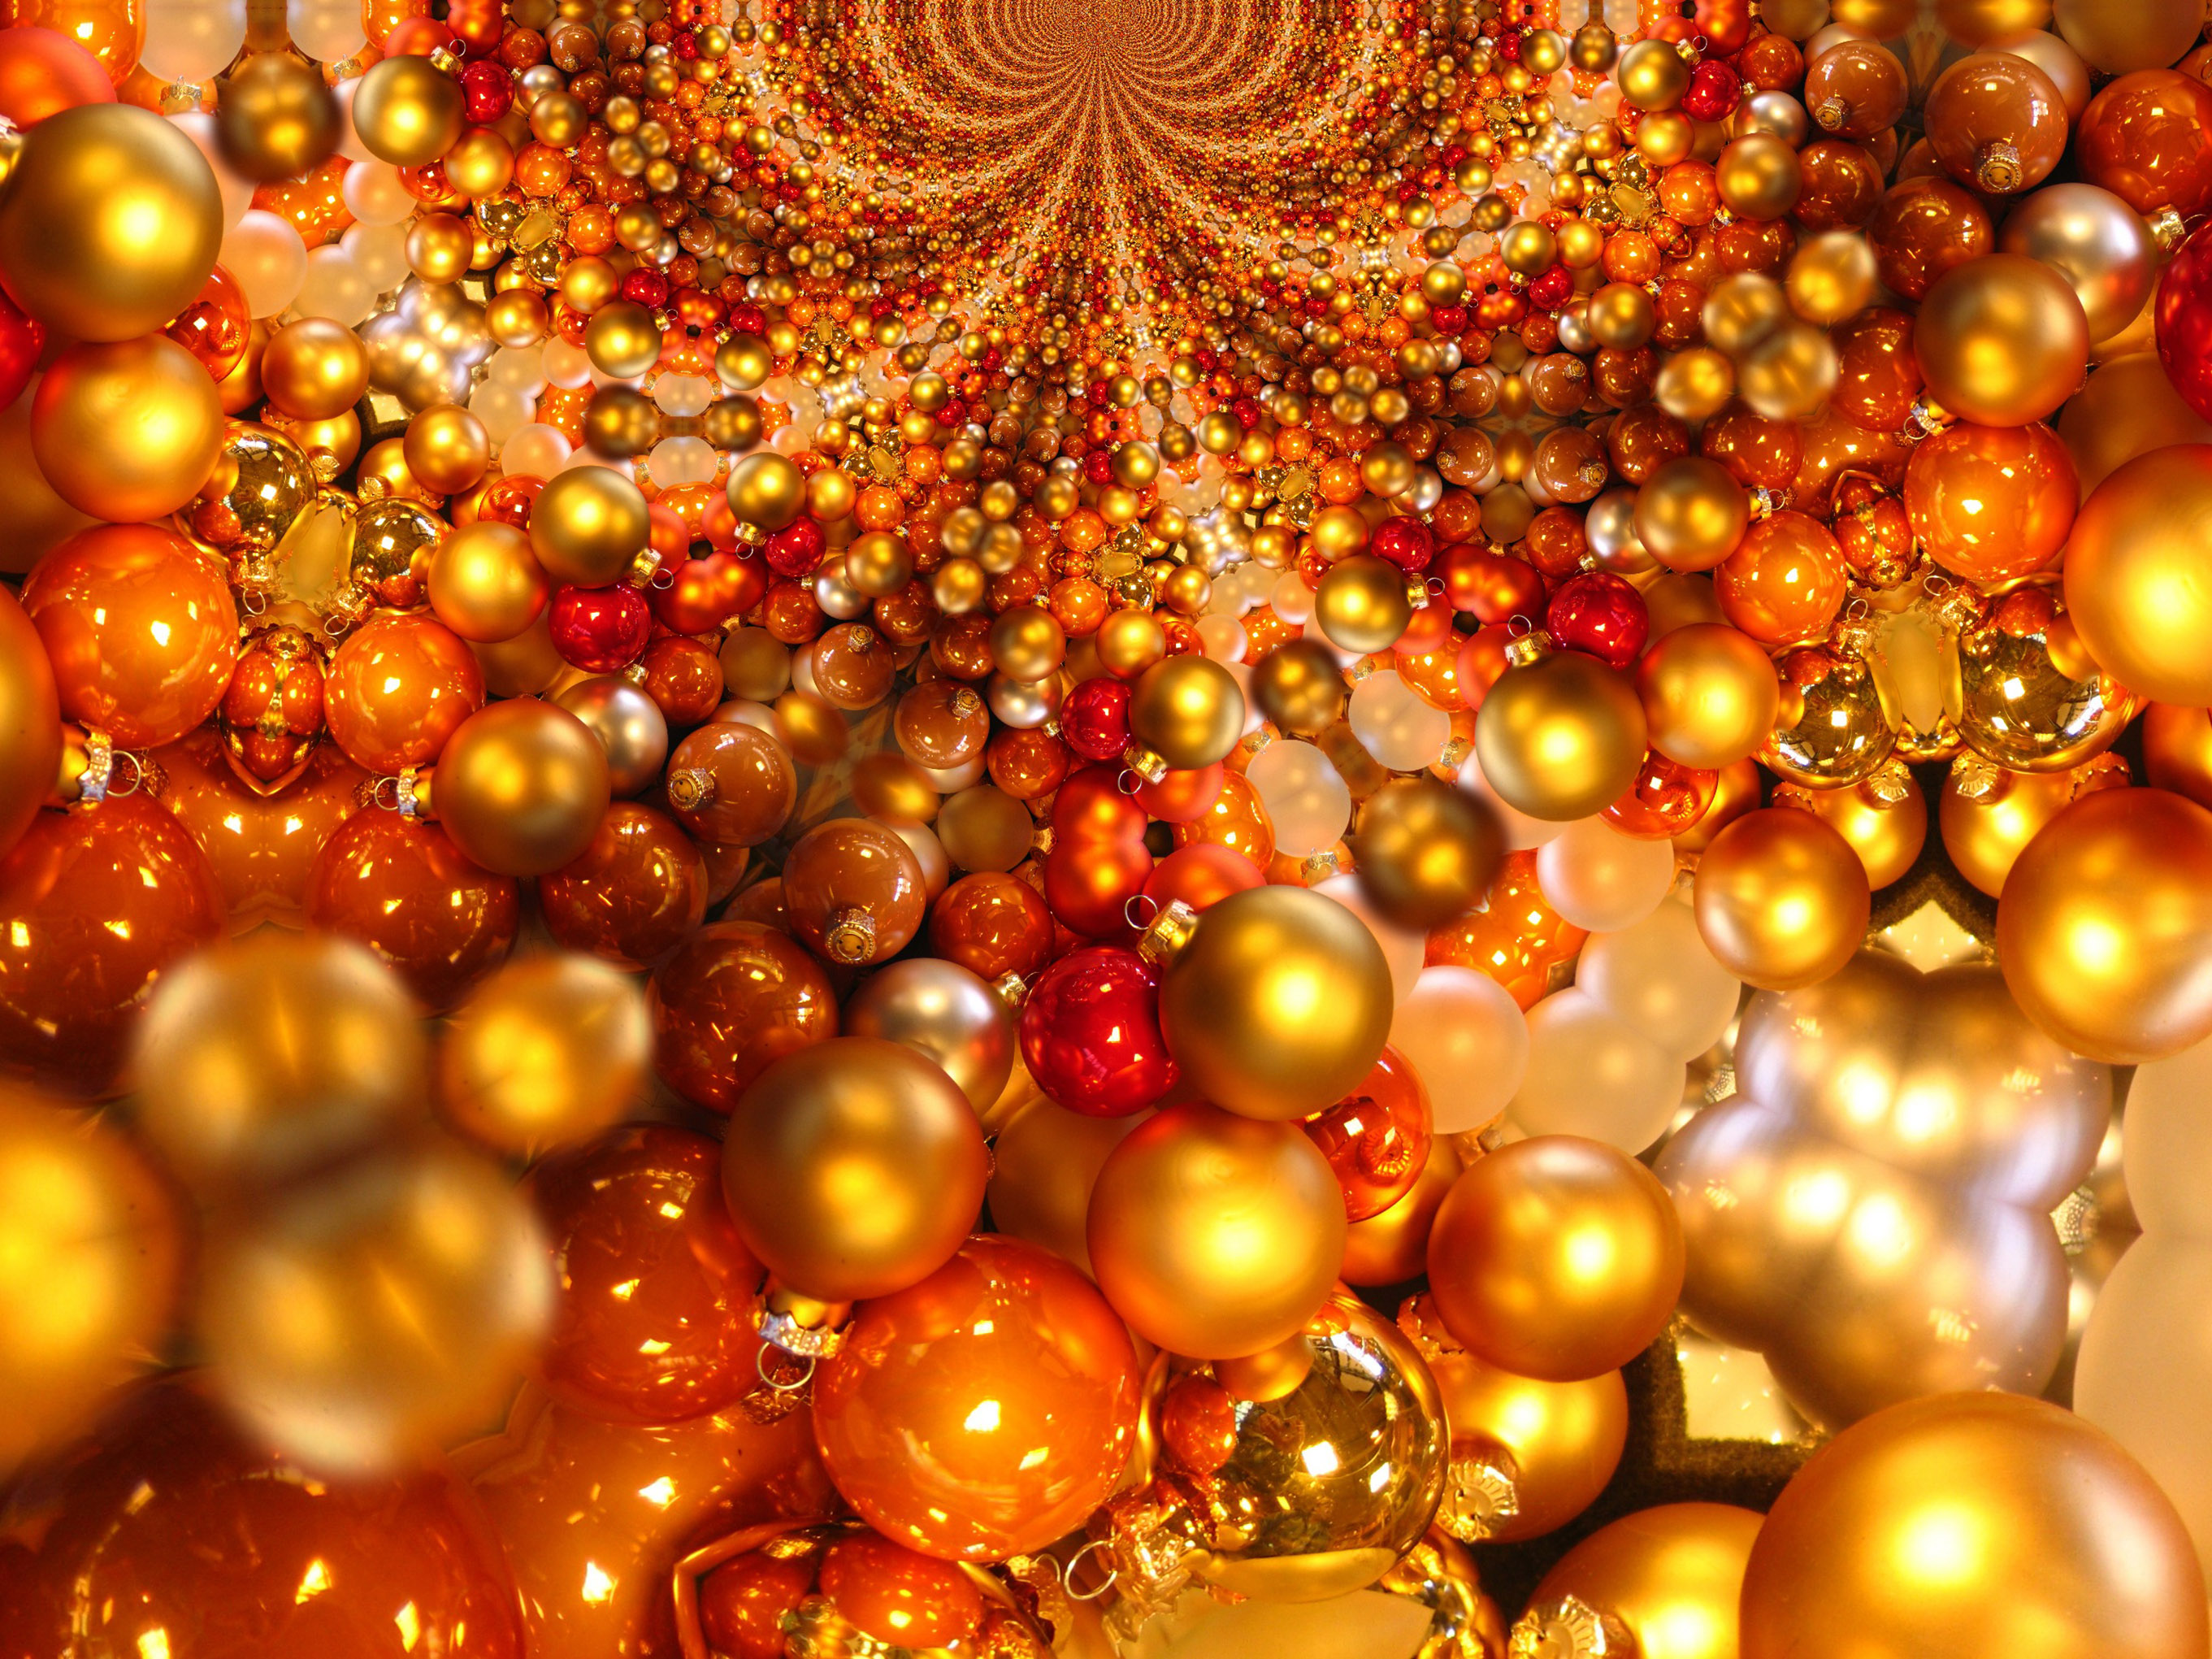 20 Great Ball or Bauble Themed Free Christmas Wallpaper or